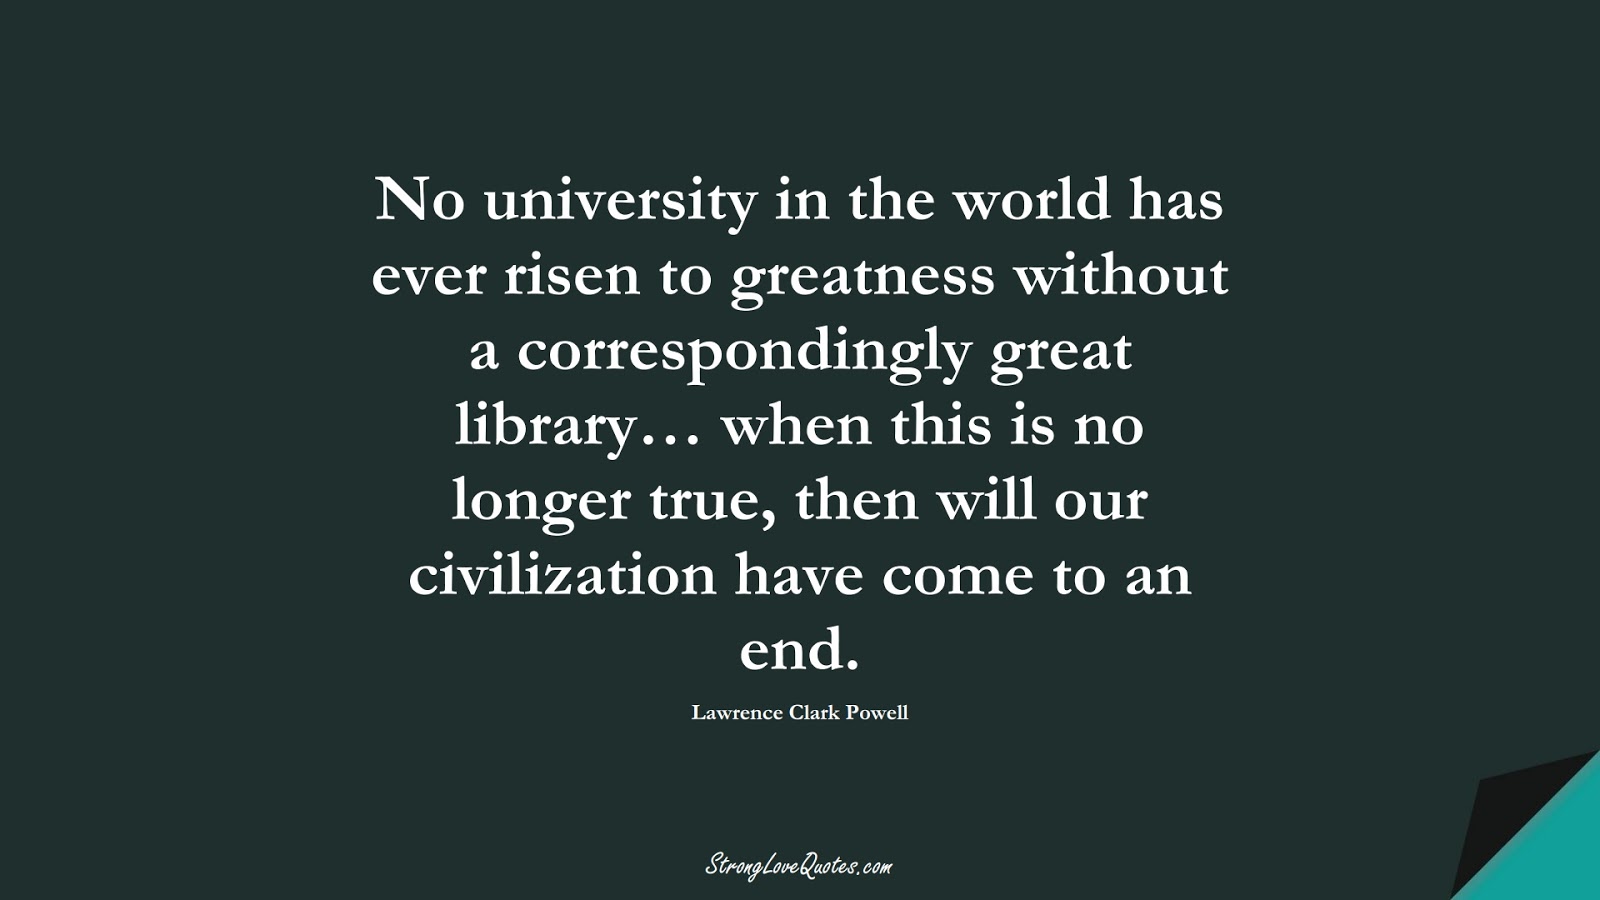 No university in the world has ever risen to greatness without a correspondingly great library… when this is no longer true, then will our civilization have come to an end. (Lawrence Clark Powell);  #EducationQuotes